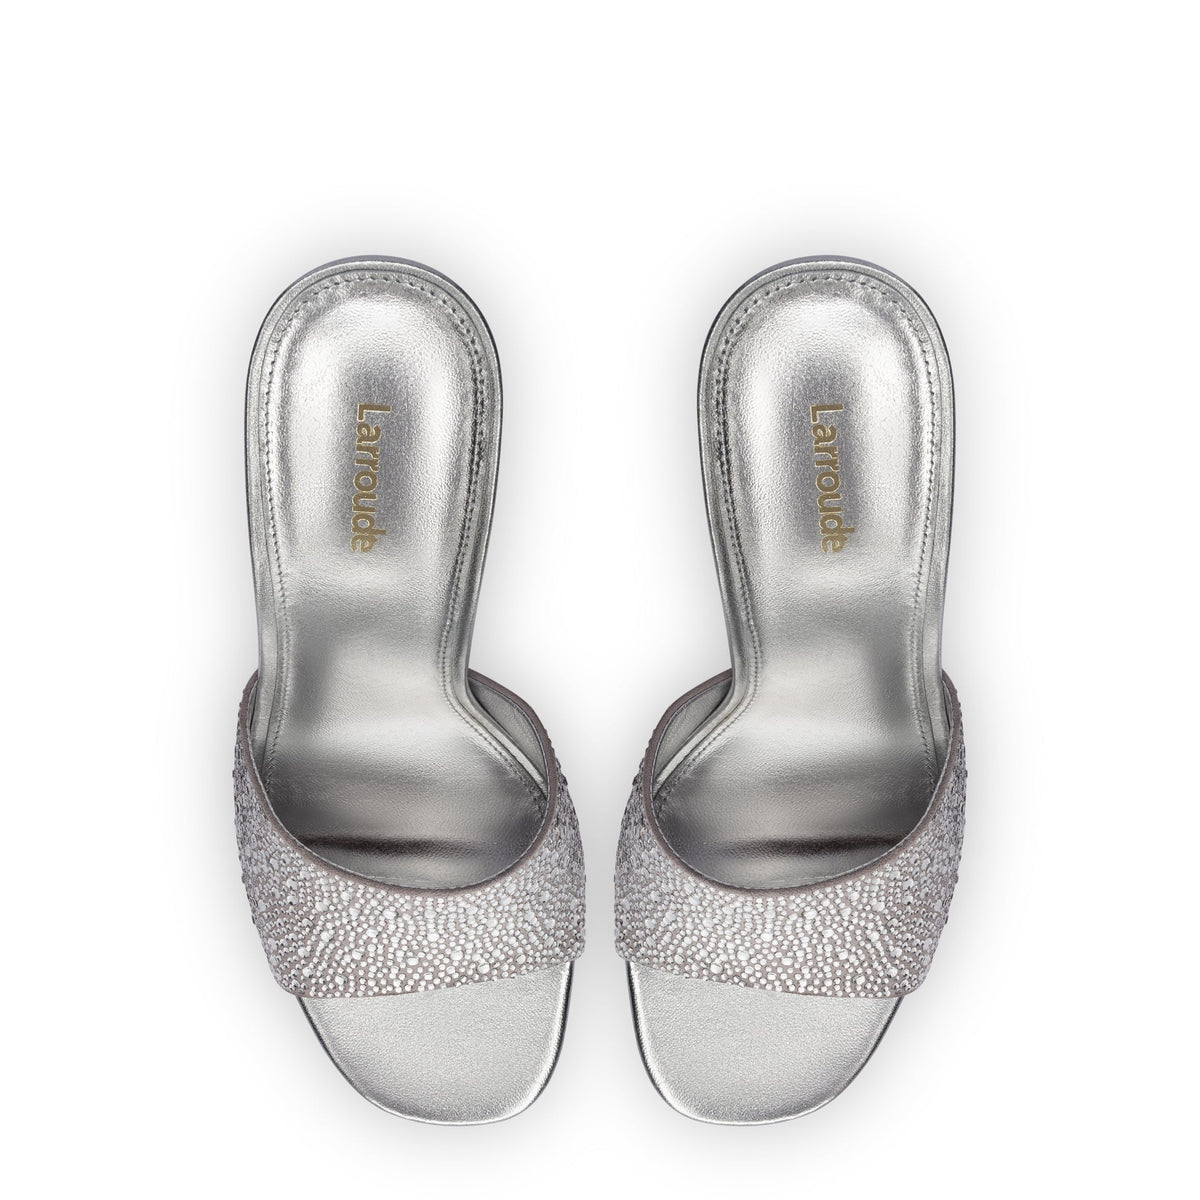 Colette Crystal Mule In Gray Suede